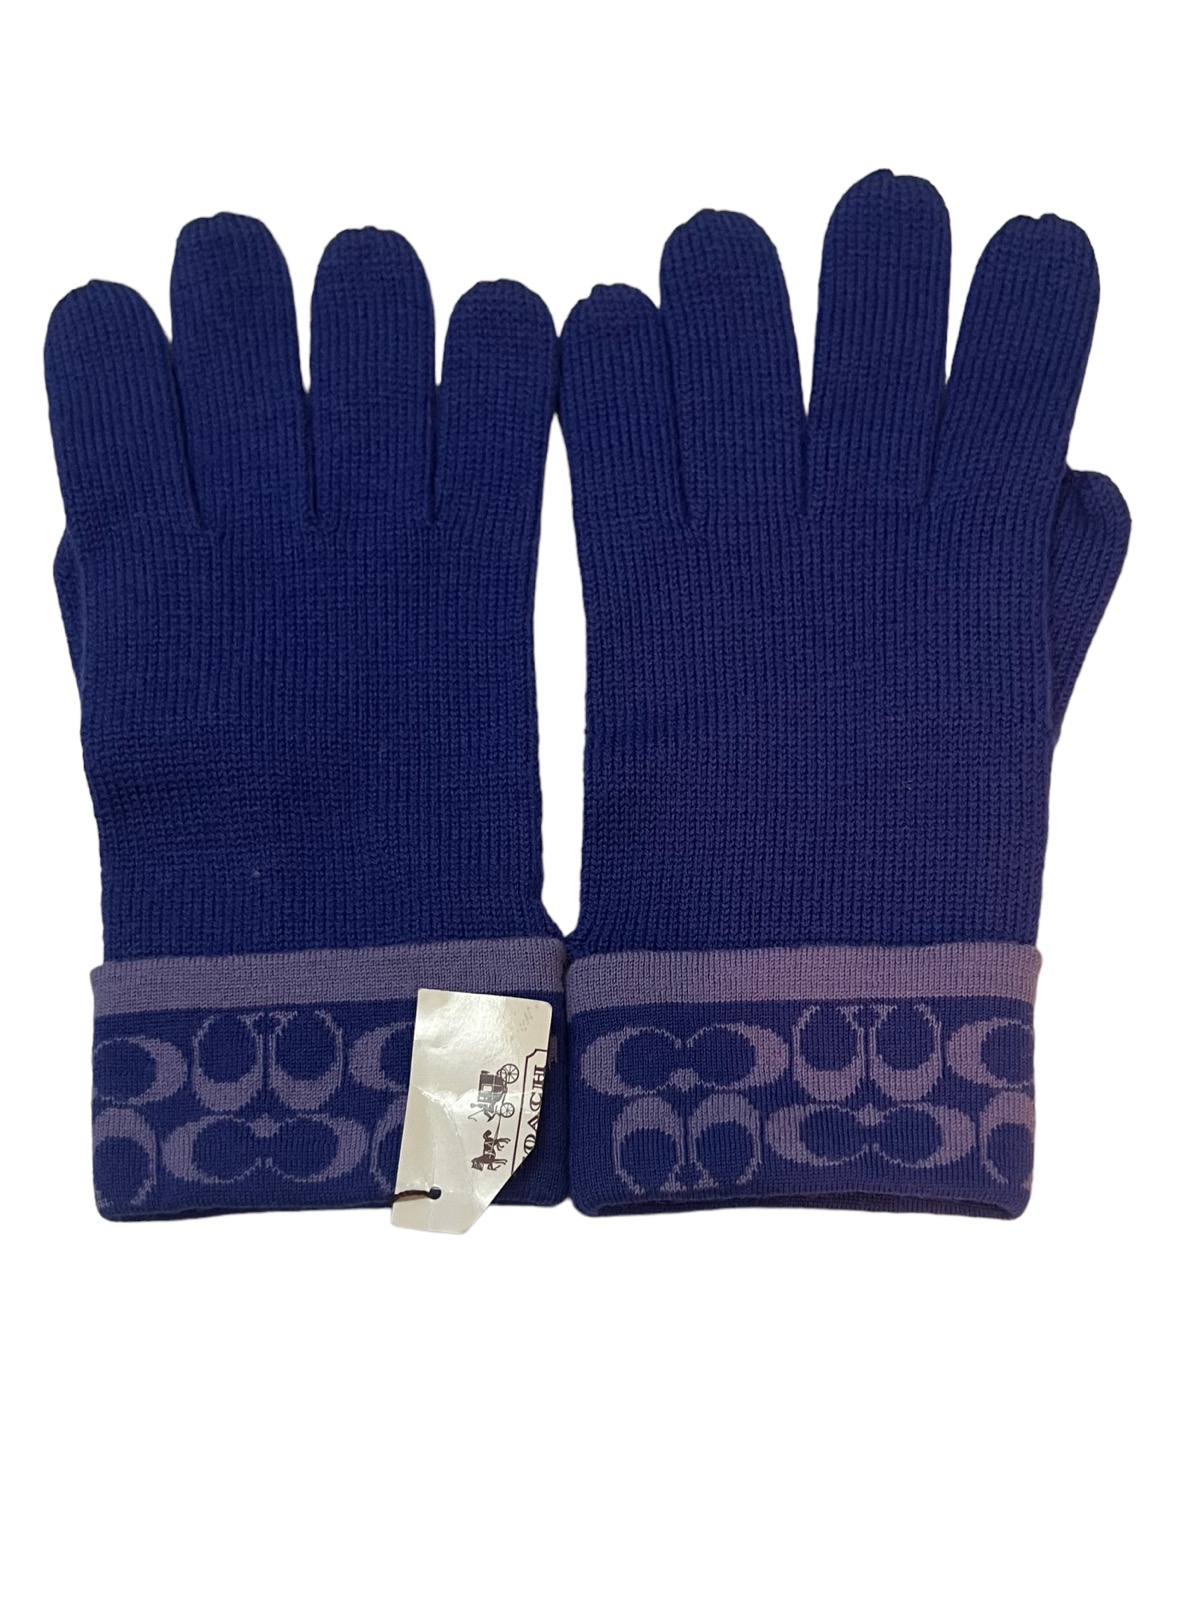 Coach - COACH ( NEW OLD STOCK ) (NOS) SIGNATURE KNIT TECH GLOVES - 2